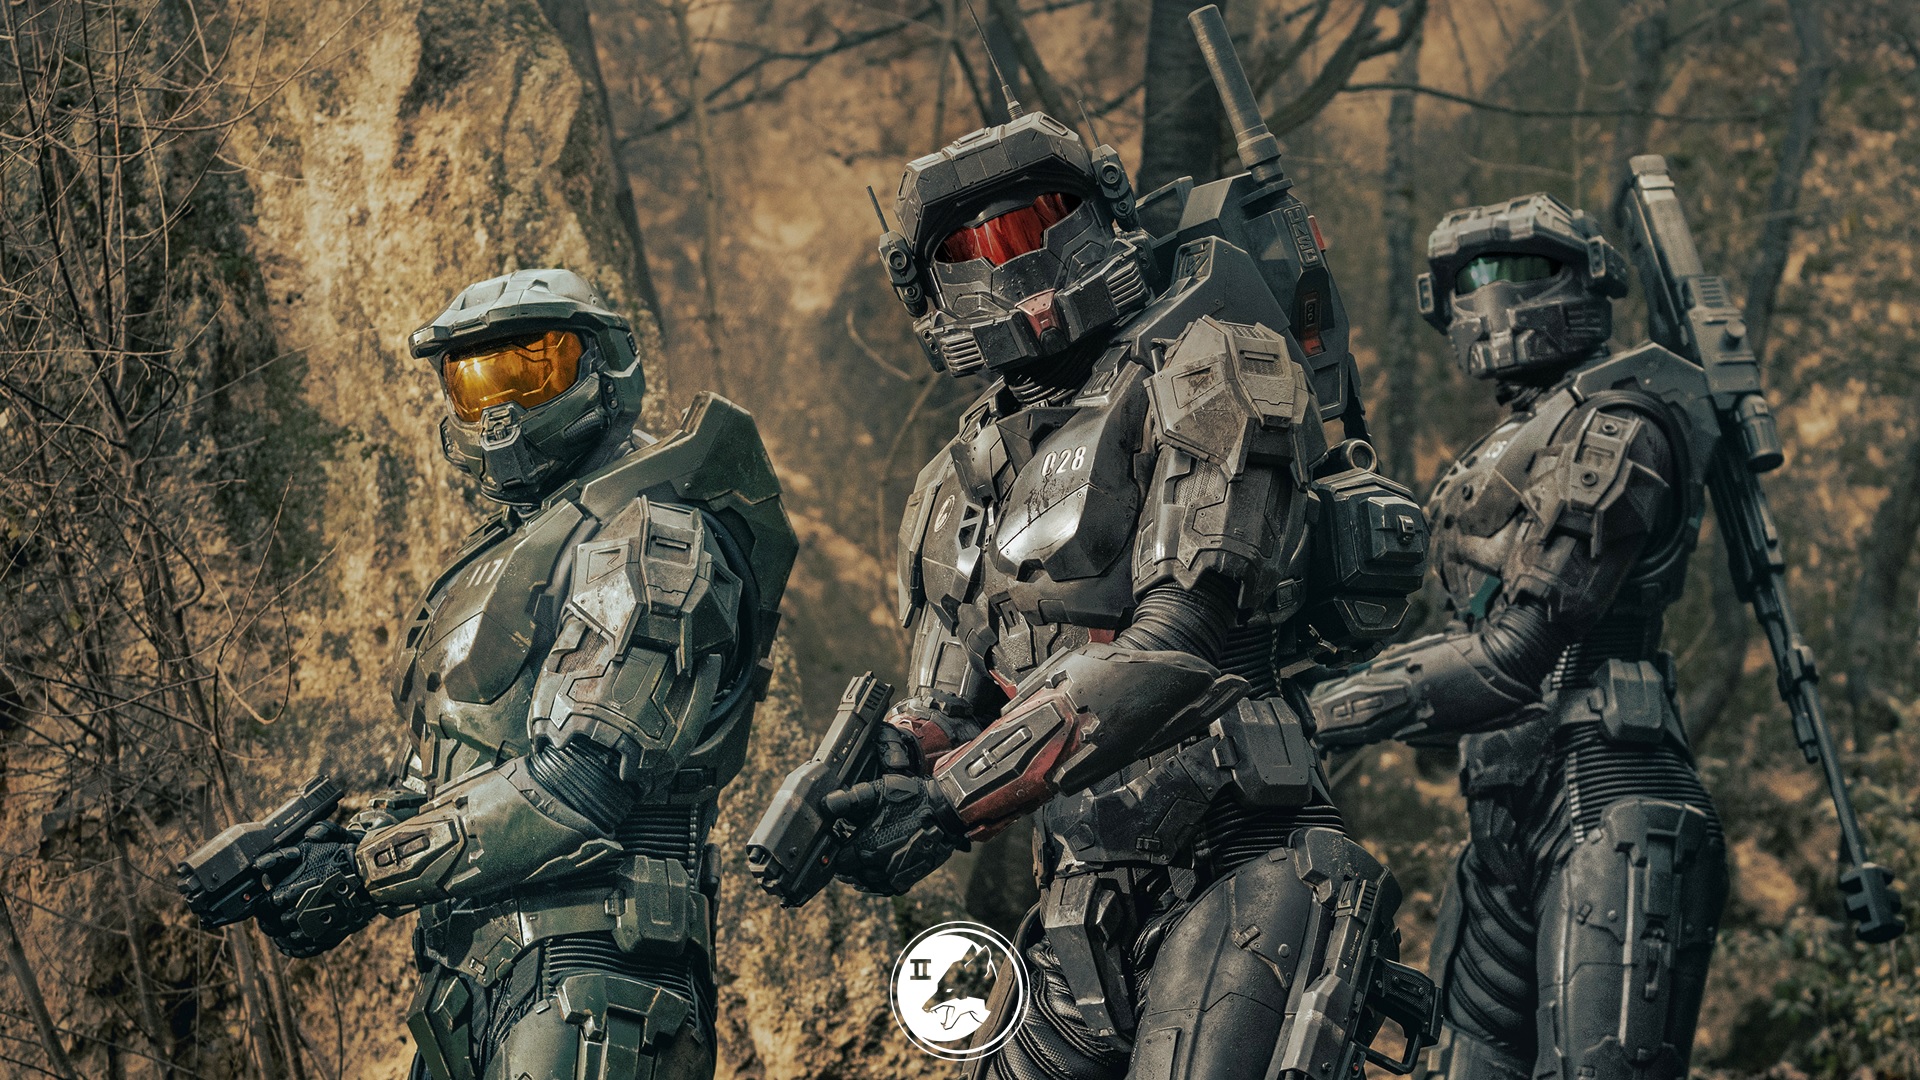 Halo Series Signs Three New Cast Members